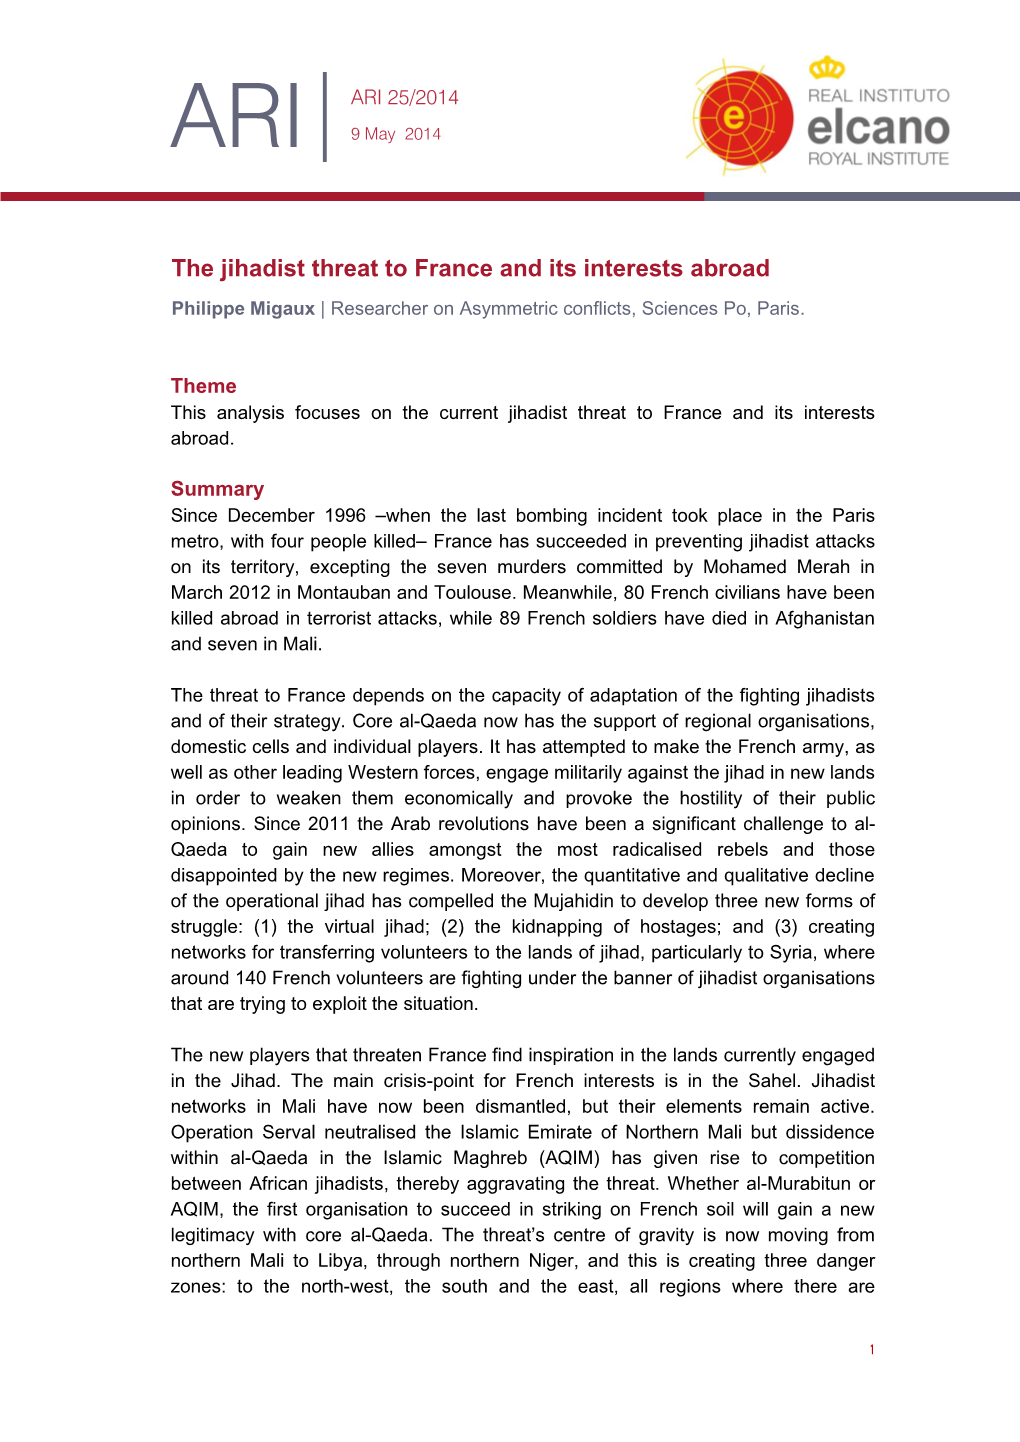 The Jihadist Threat to France and Its Interests Abroad Philippe Migaux | Researcher on Asymmetric Conflicts, Sciences Po, Paris